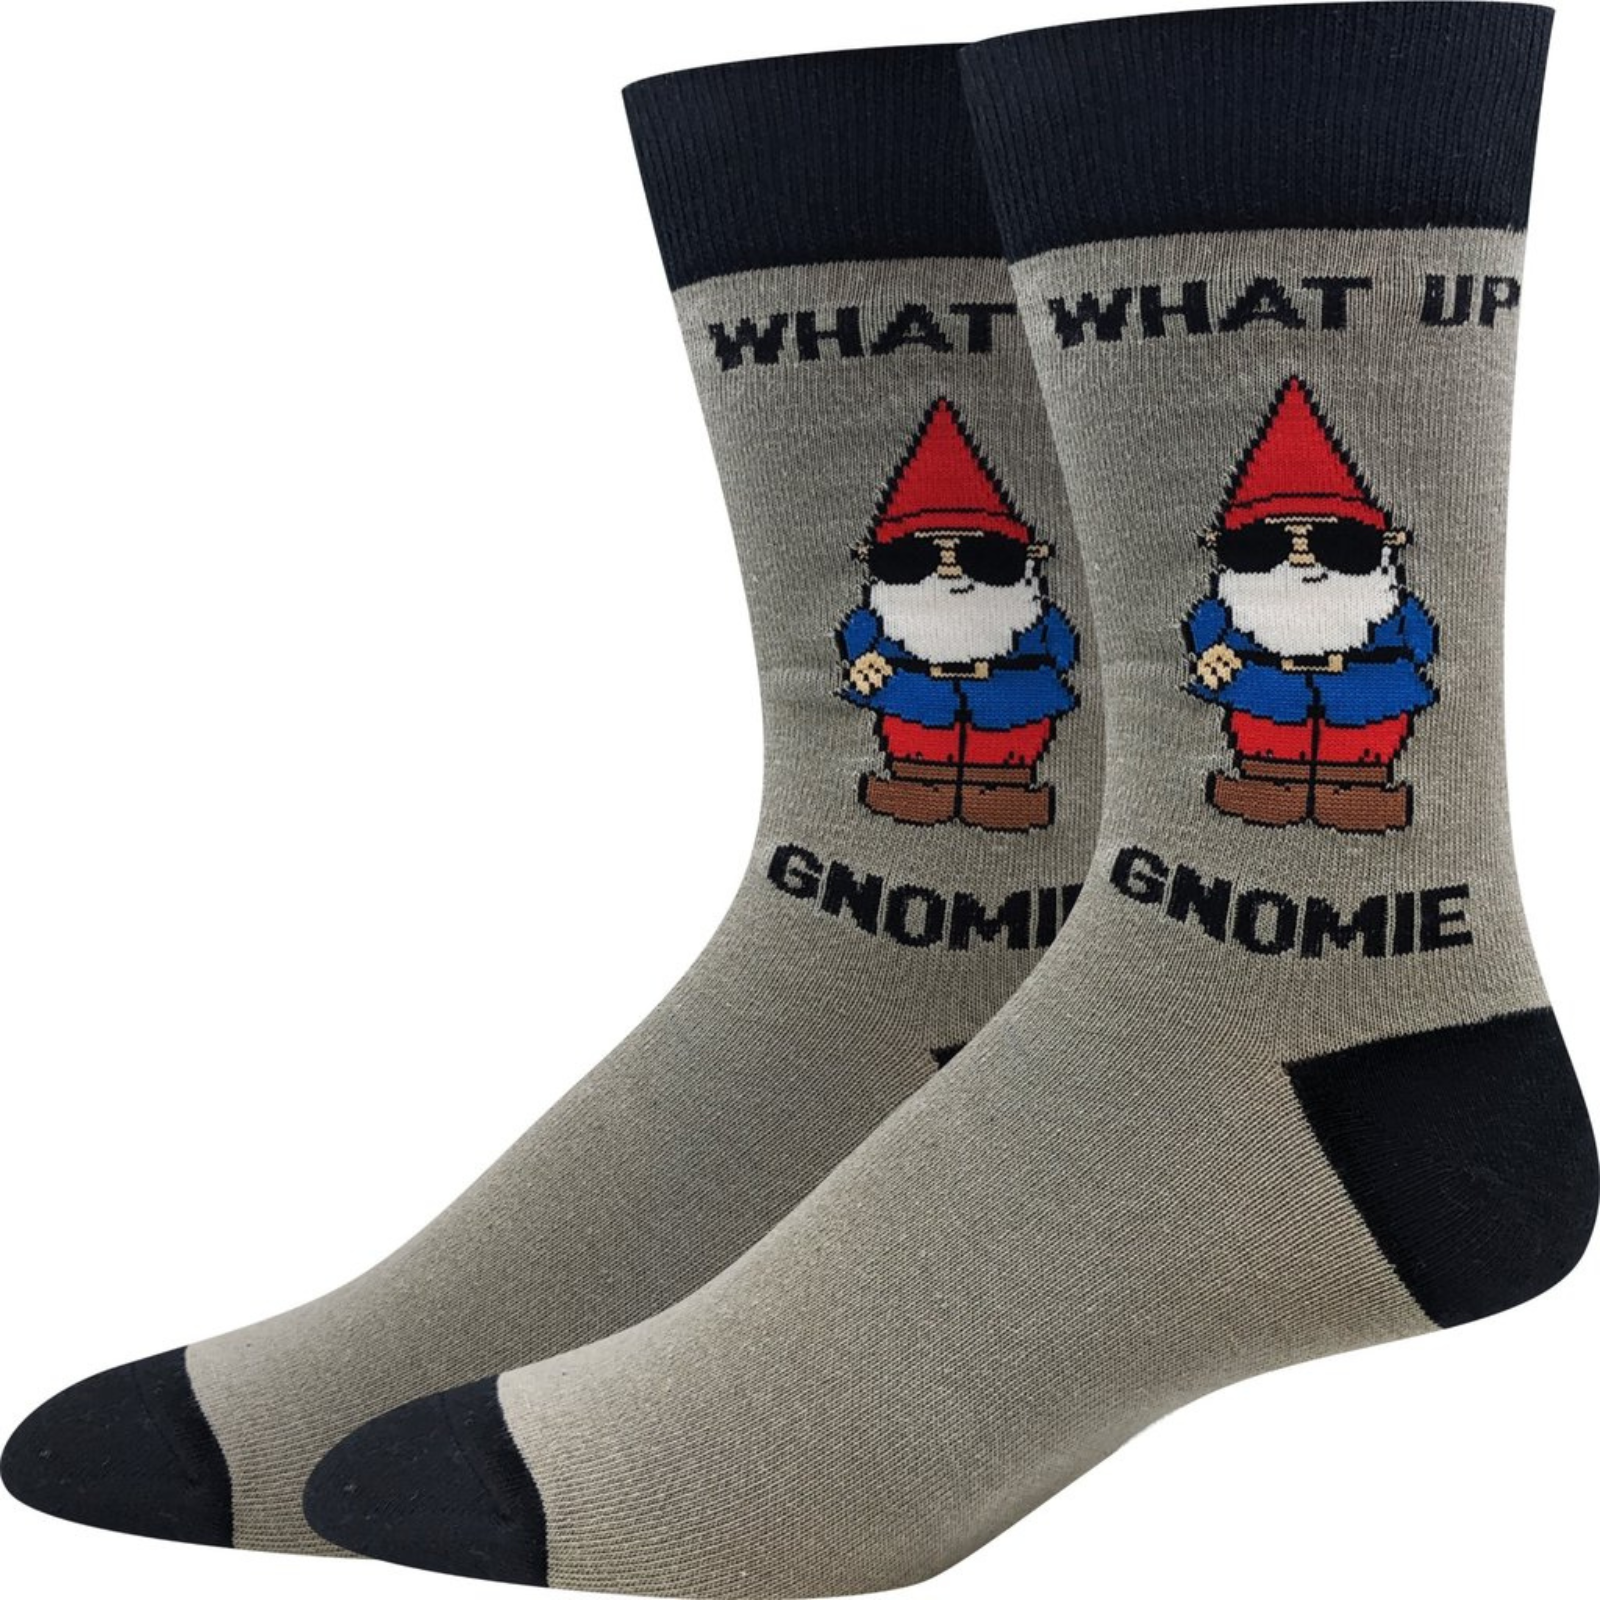 Sock Harbor What Up Gnomie men's sock in gray featuring gray sock with black toe, cuff and heel with Gnome wearing sunglasses